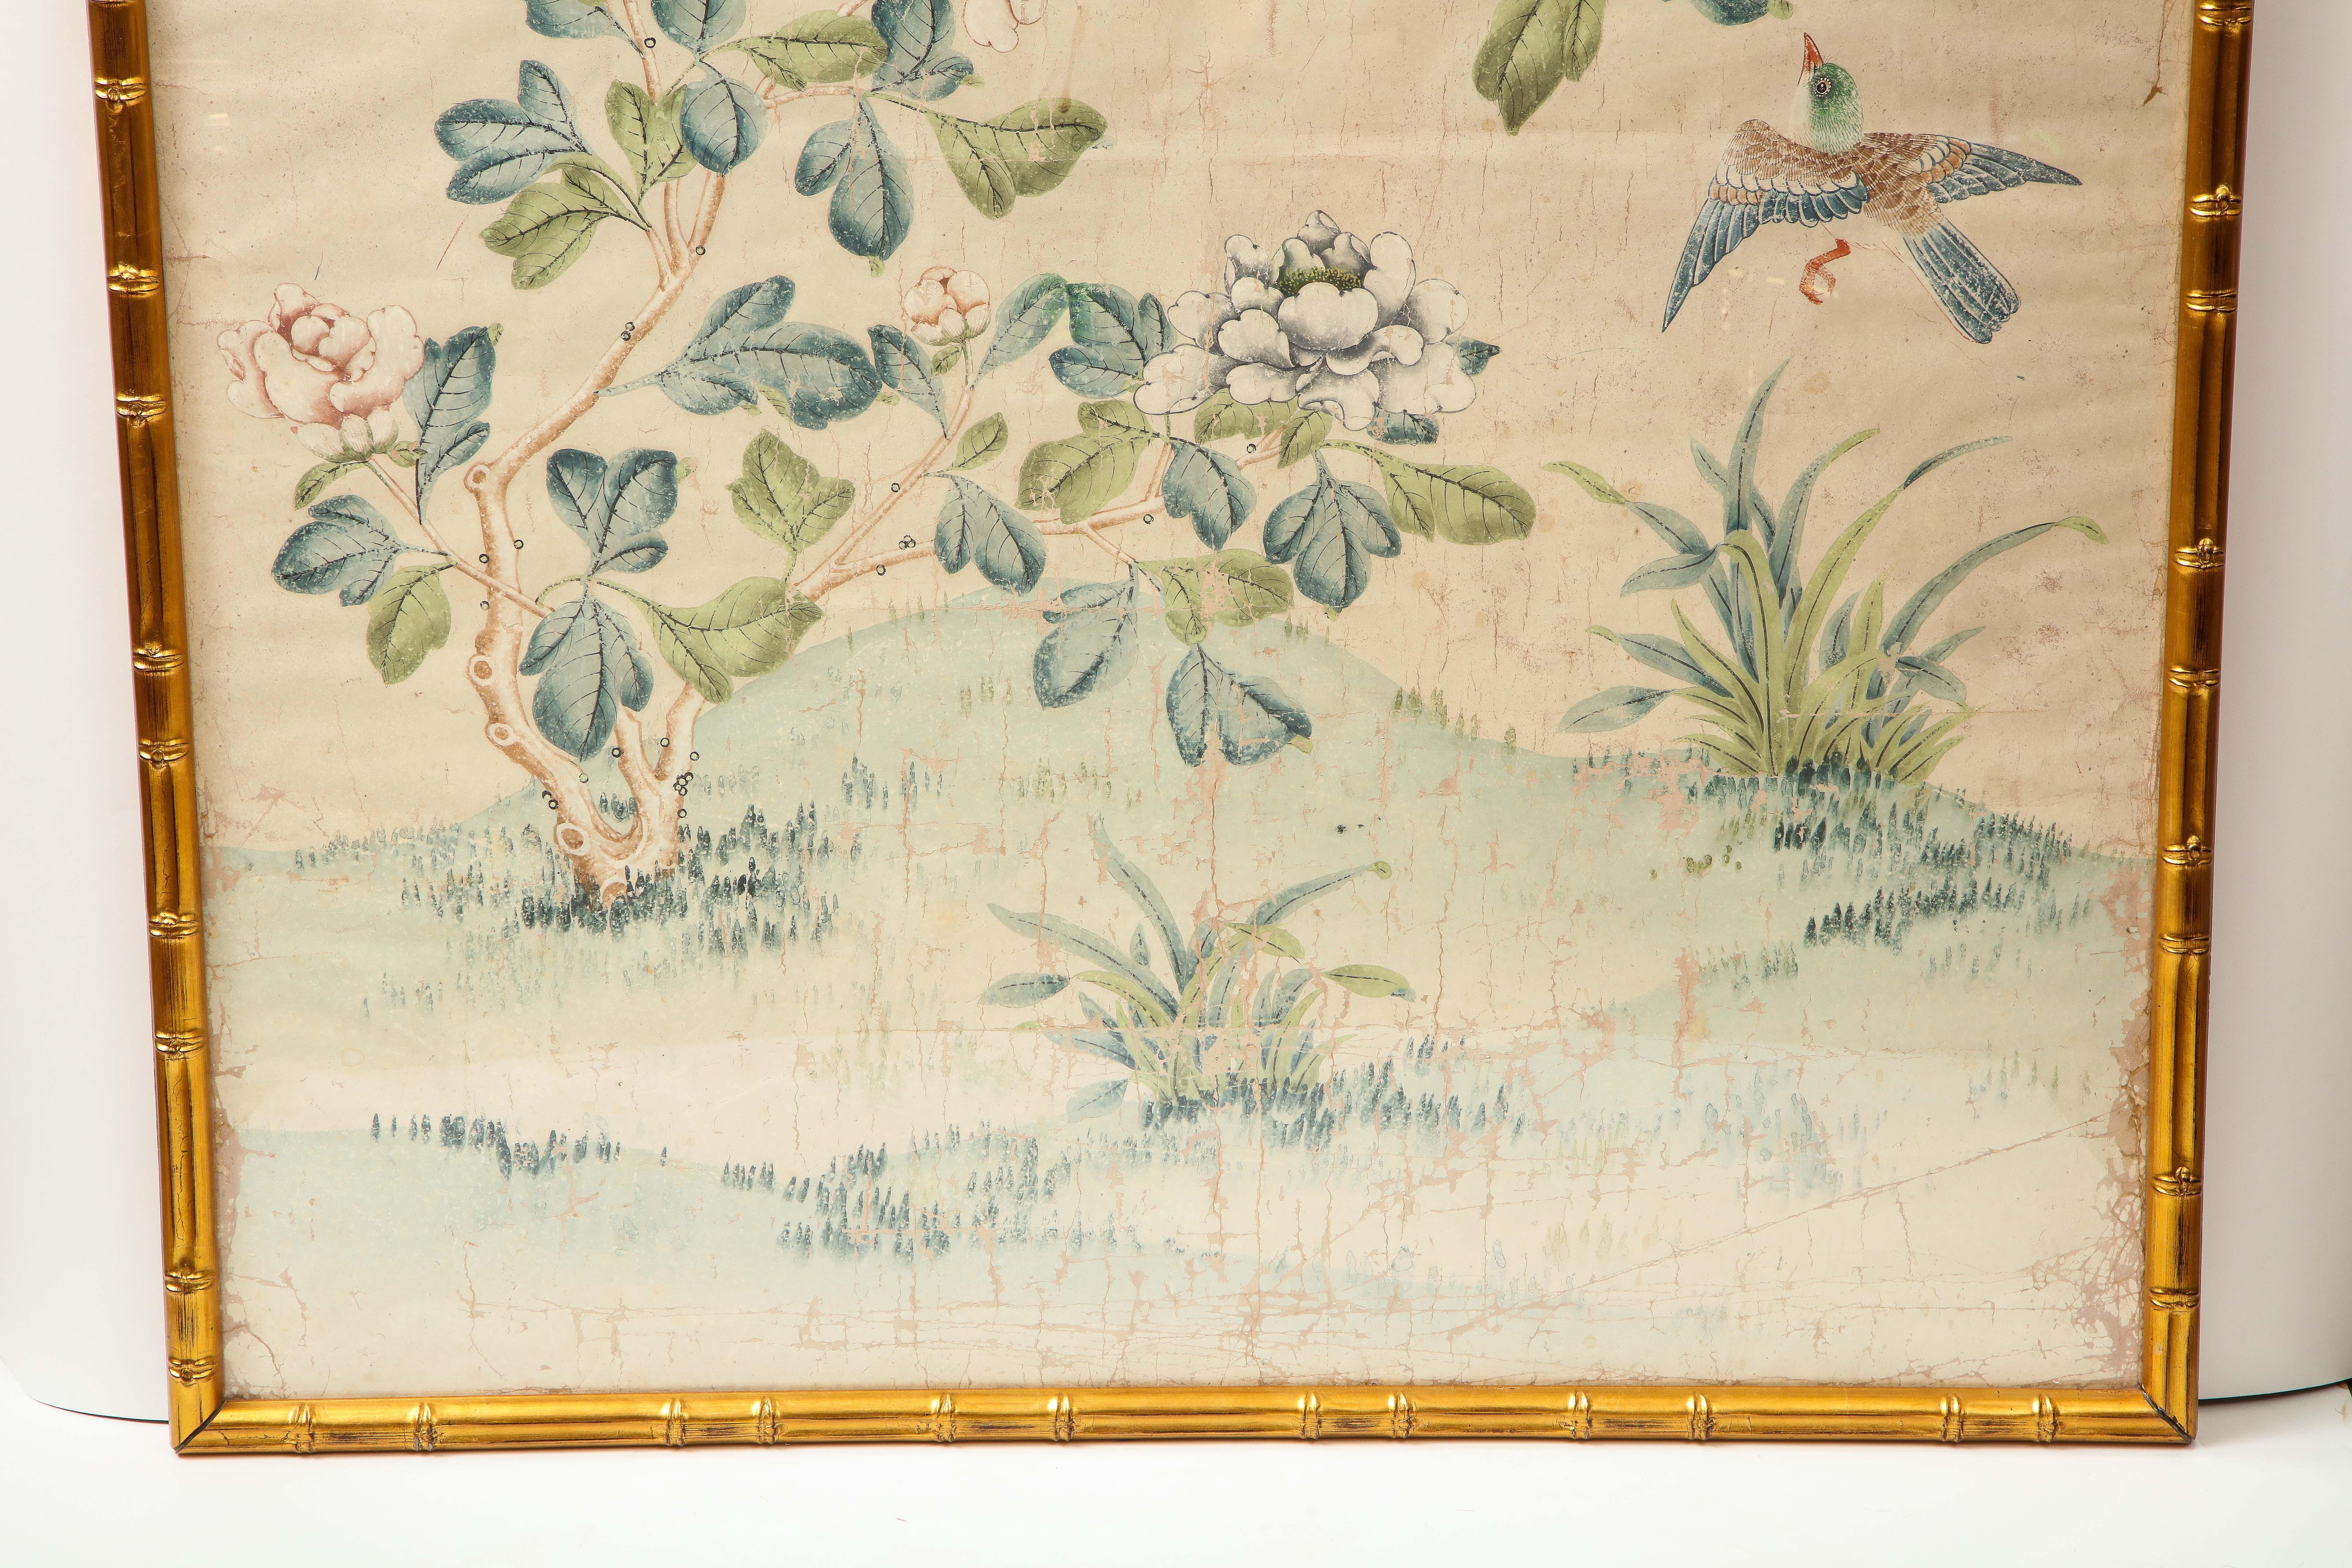 A stunning hand painted wallpaper panel by Gracie in a giltwood faux bamboo frame. The lovely scene is composed of branches, flowers, birds and butterflies in soft, muted tones. This piece could inspire the colors used in a room and is a great way